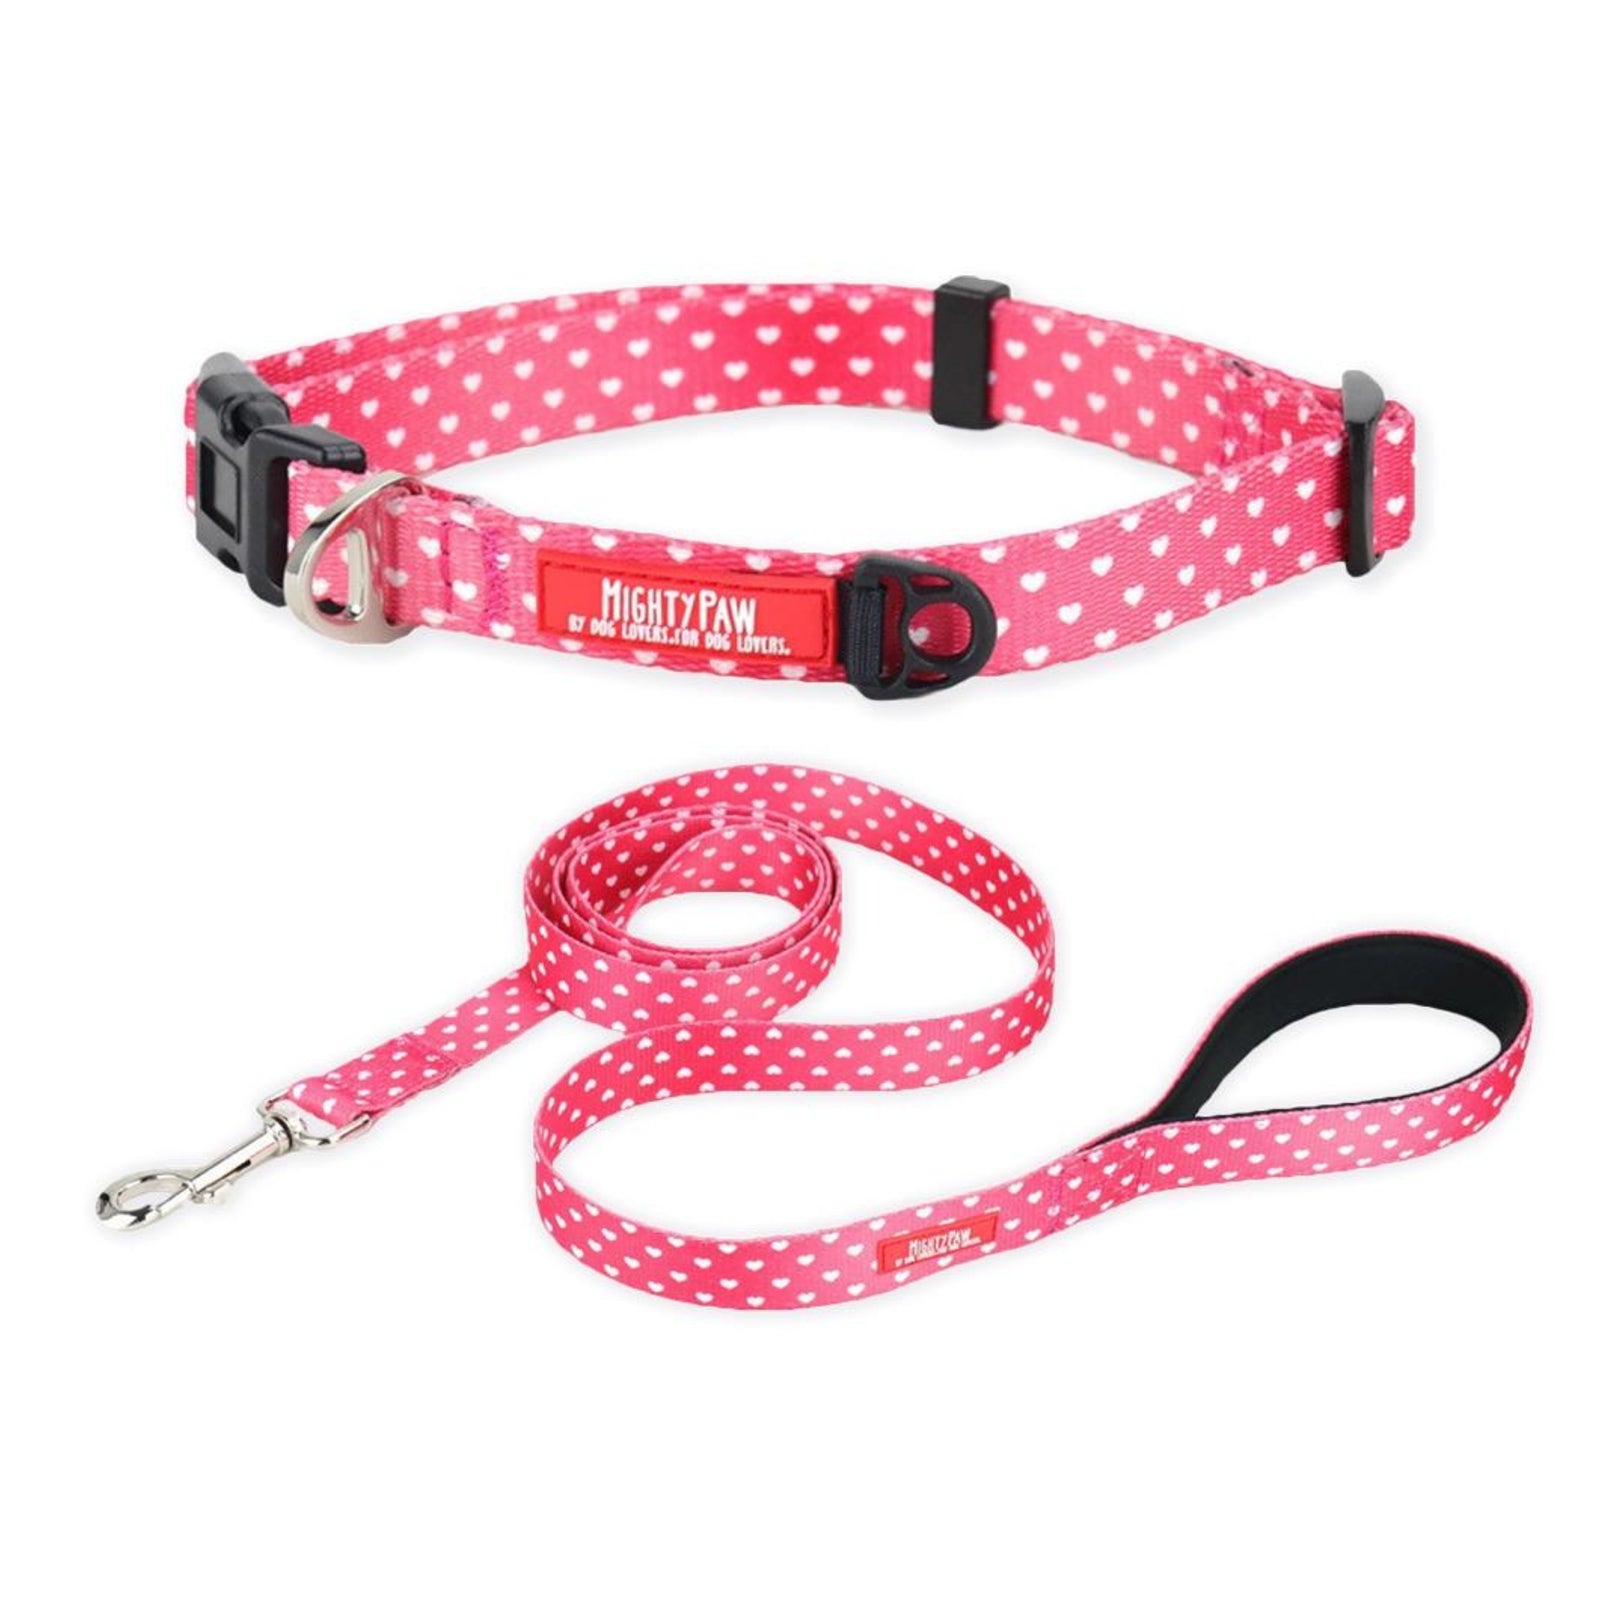 Mighty Paw Valentine's Day Heart Pattern Collar and Leash Bundle